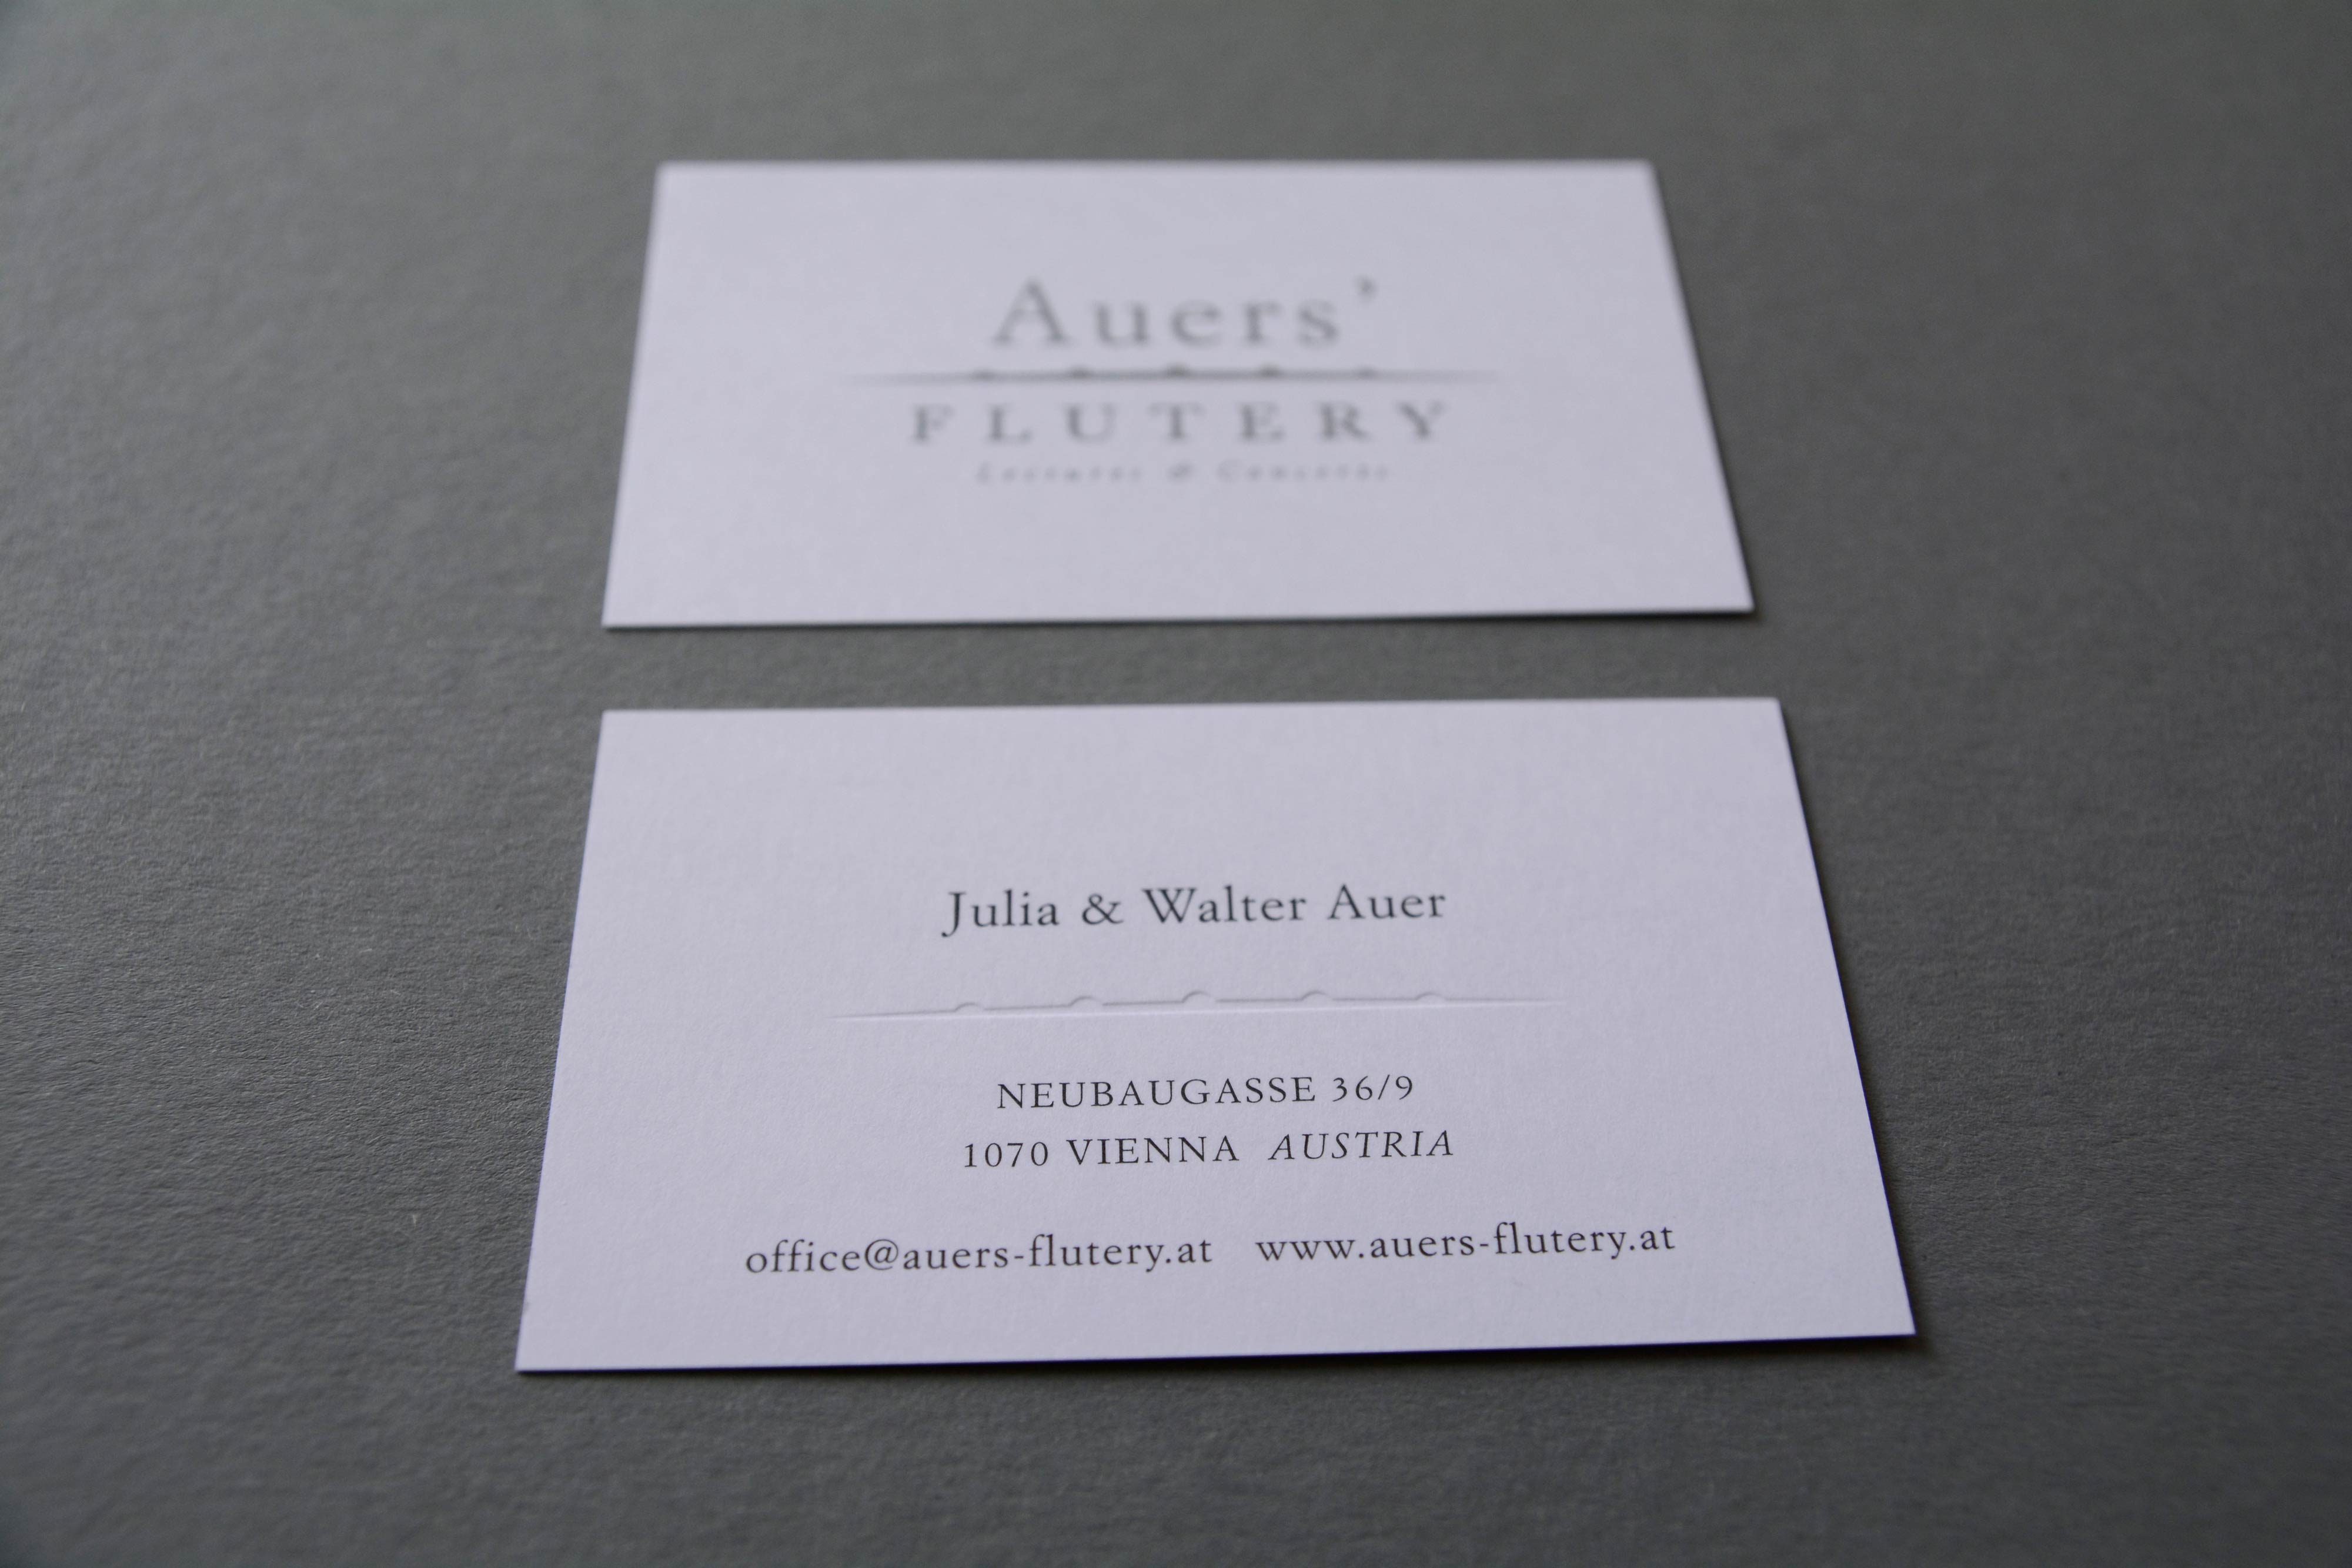 Detail shot of business card. Part of logo is embossed.